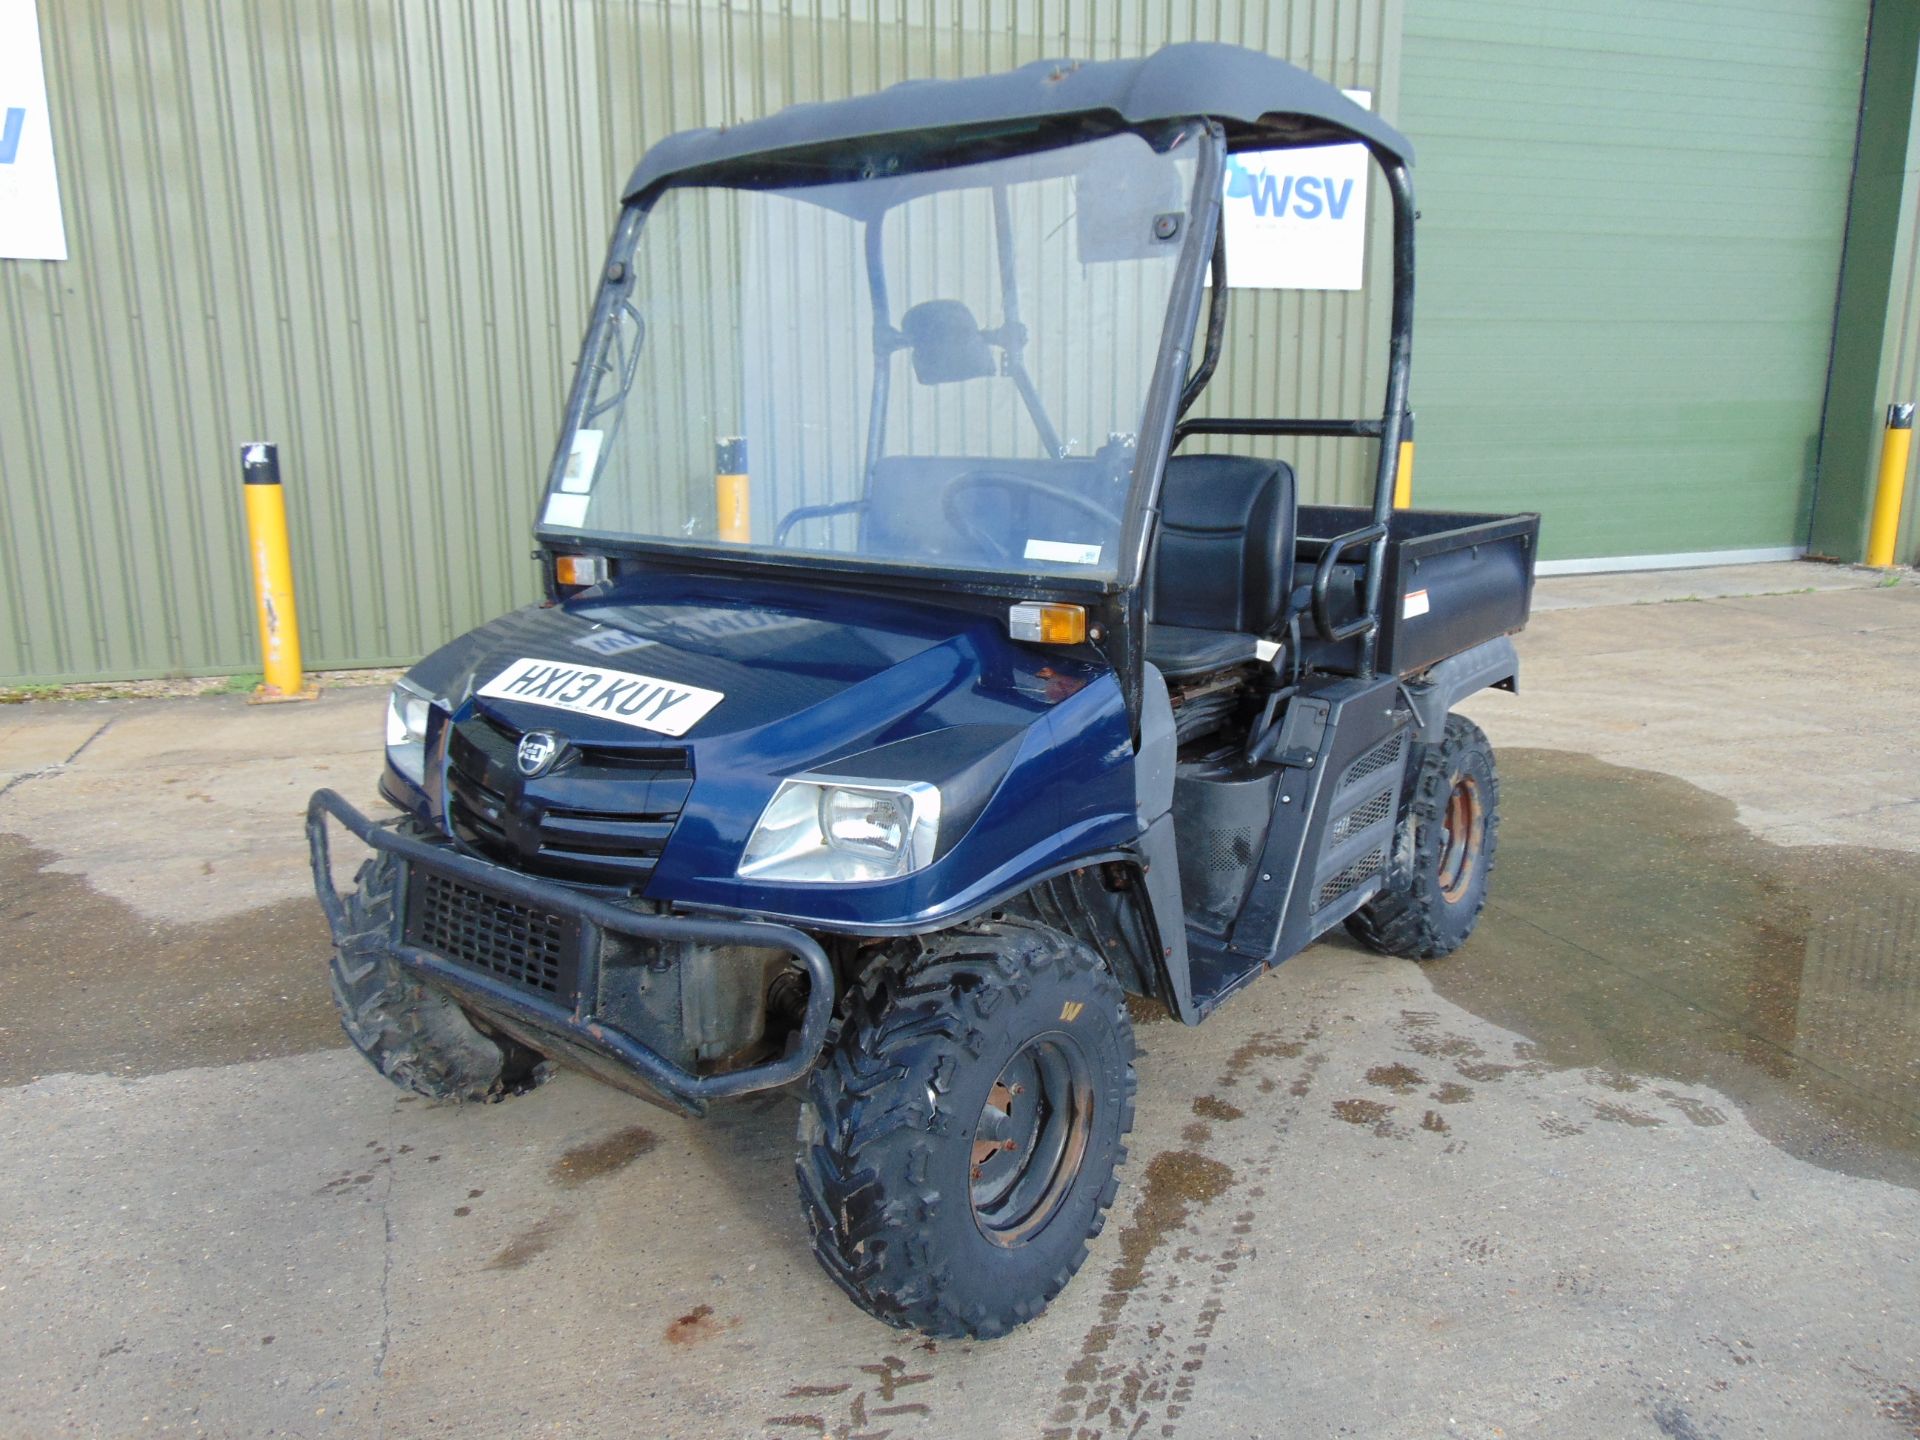 2013 Cushman XD1600 4x4 Diesel Utility Vehicle Showing 217 hrs - Image 4 of 17